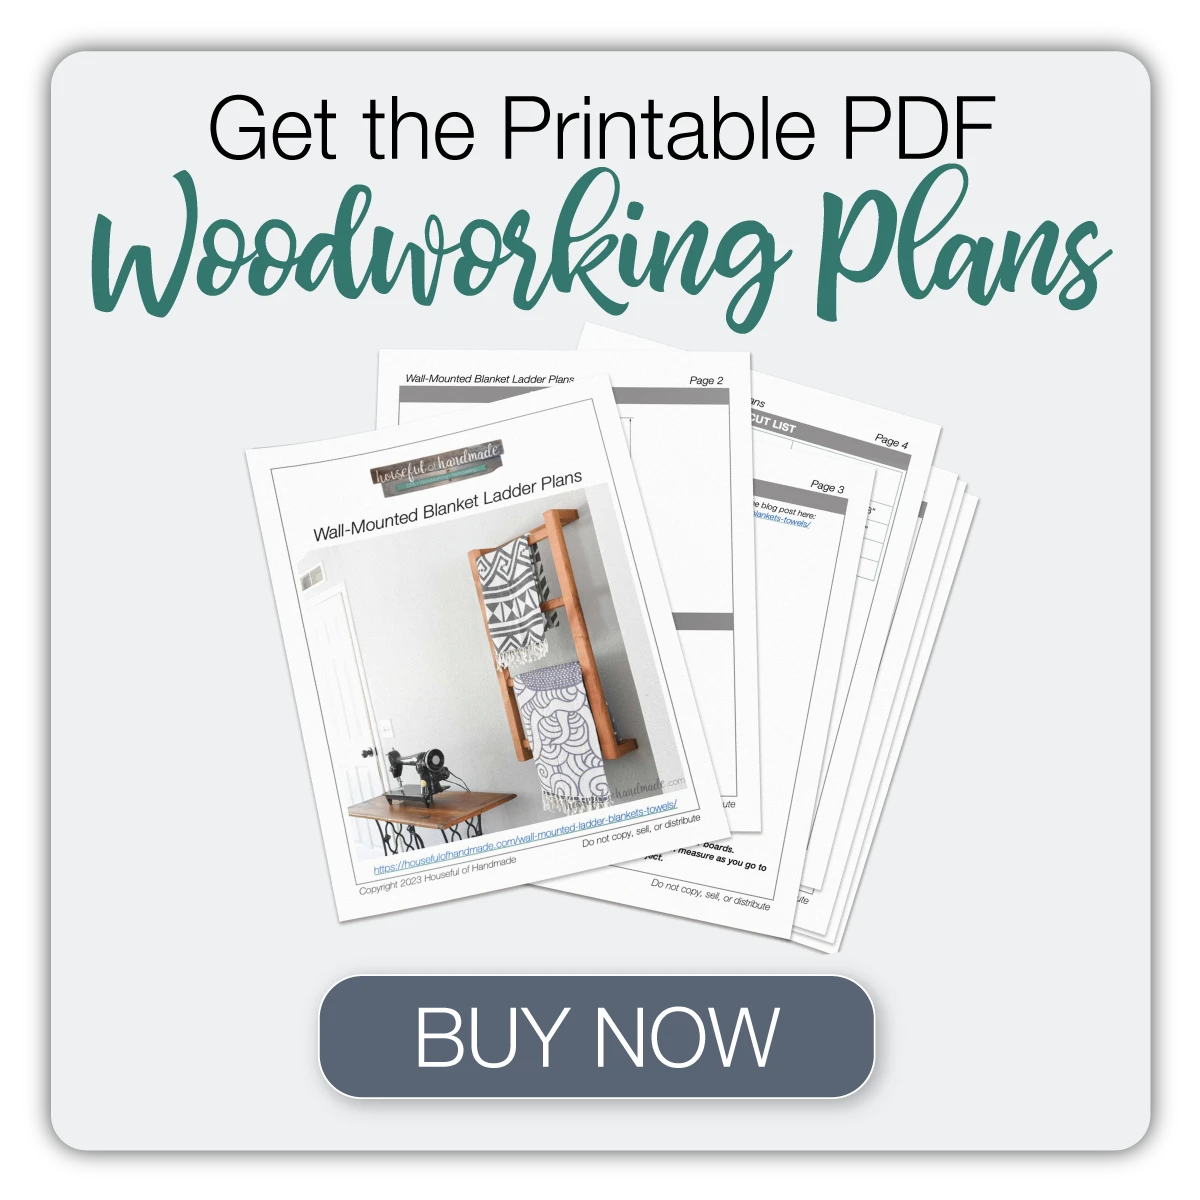 Button to buy the printable PDF plans for the wall ladder build. 